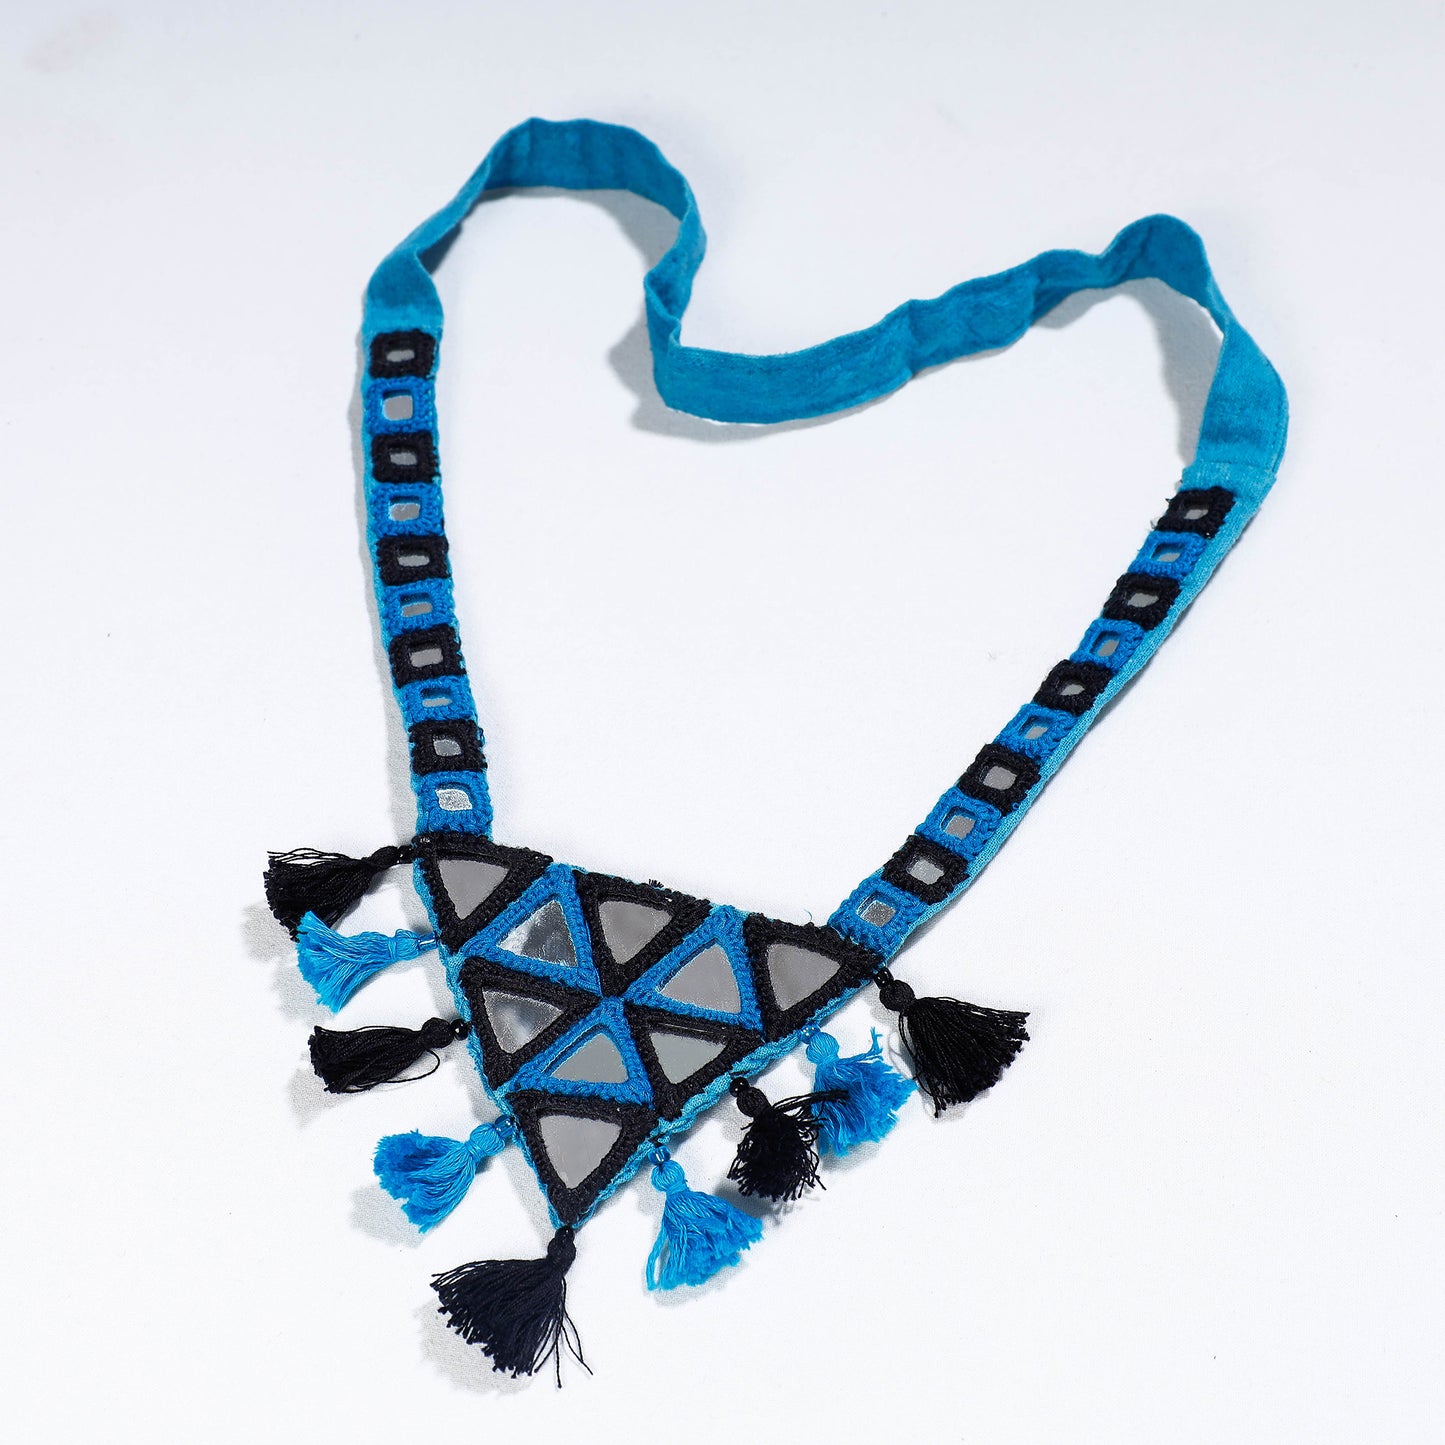 Mirror Work Kutch Embroidery Fabric Necklace